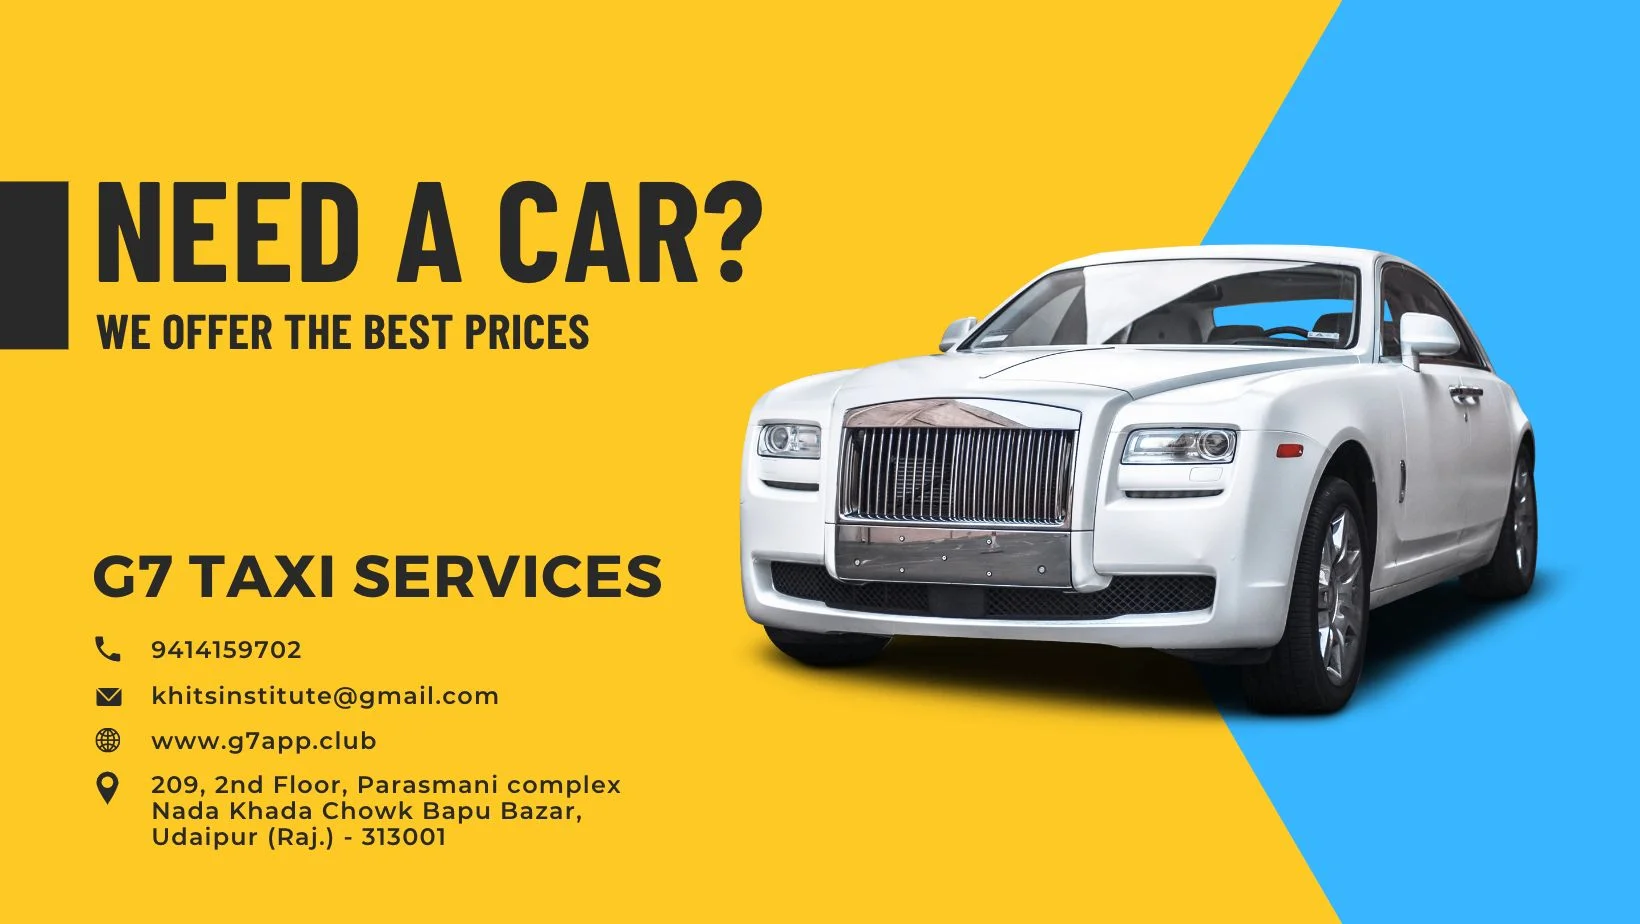 White rolas royal car, with yellow and blue background, Types of Taxi Services in Udaipur